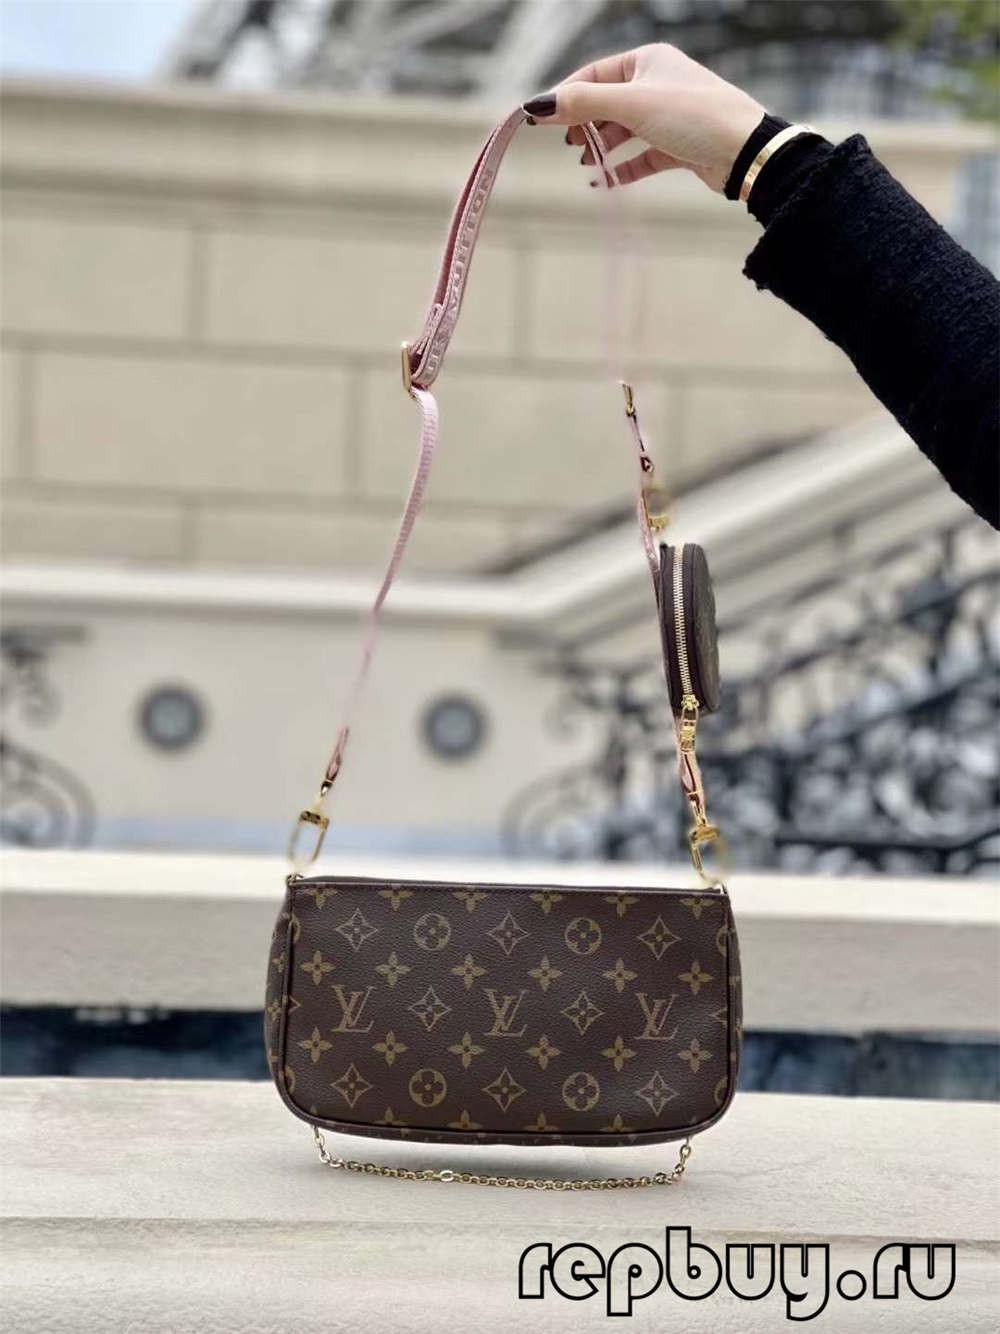 Louis Vuitton M44840 Multi Pochette 24cm Top Replica Bags Daily use effect (2022 Latest)-Best Quality Fake designer Bag Review, Replica designer bag ru